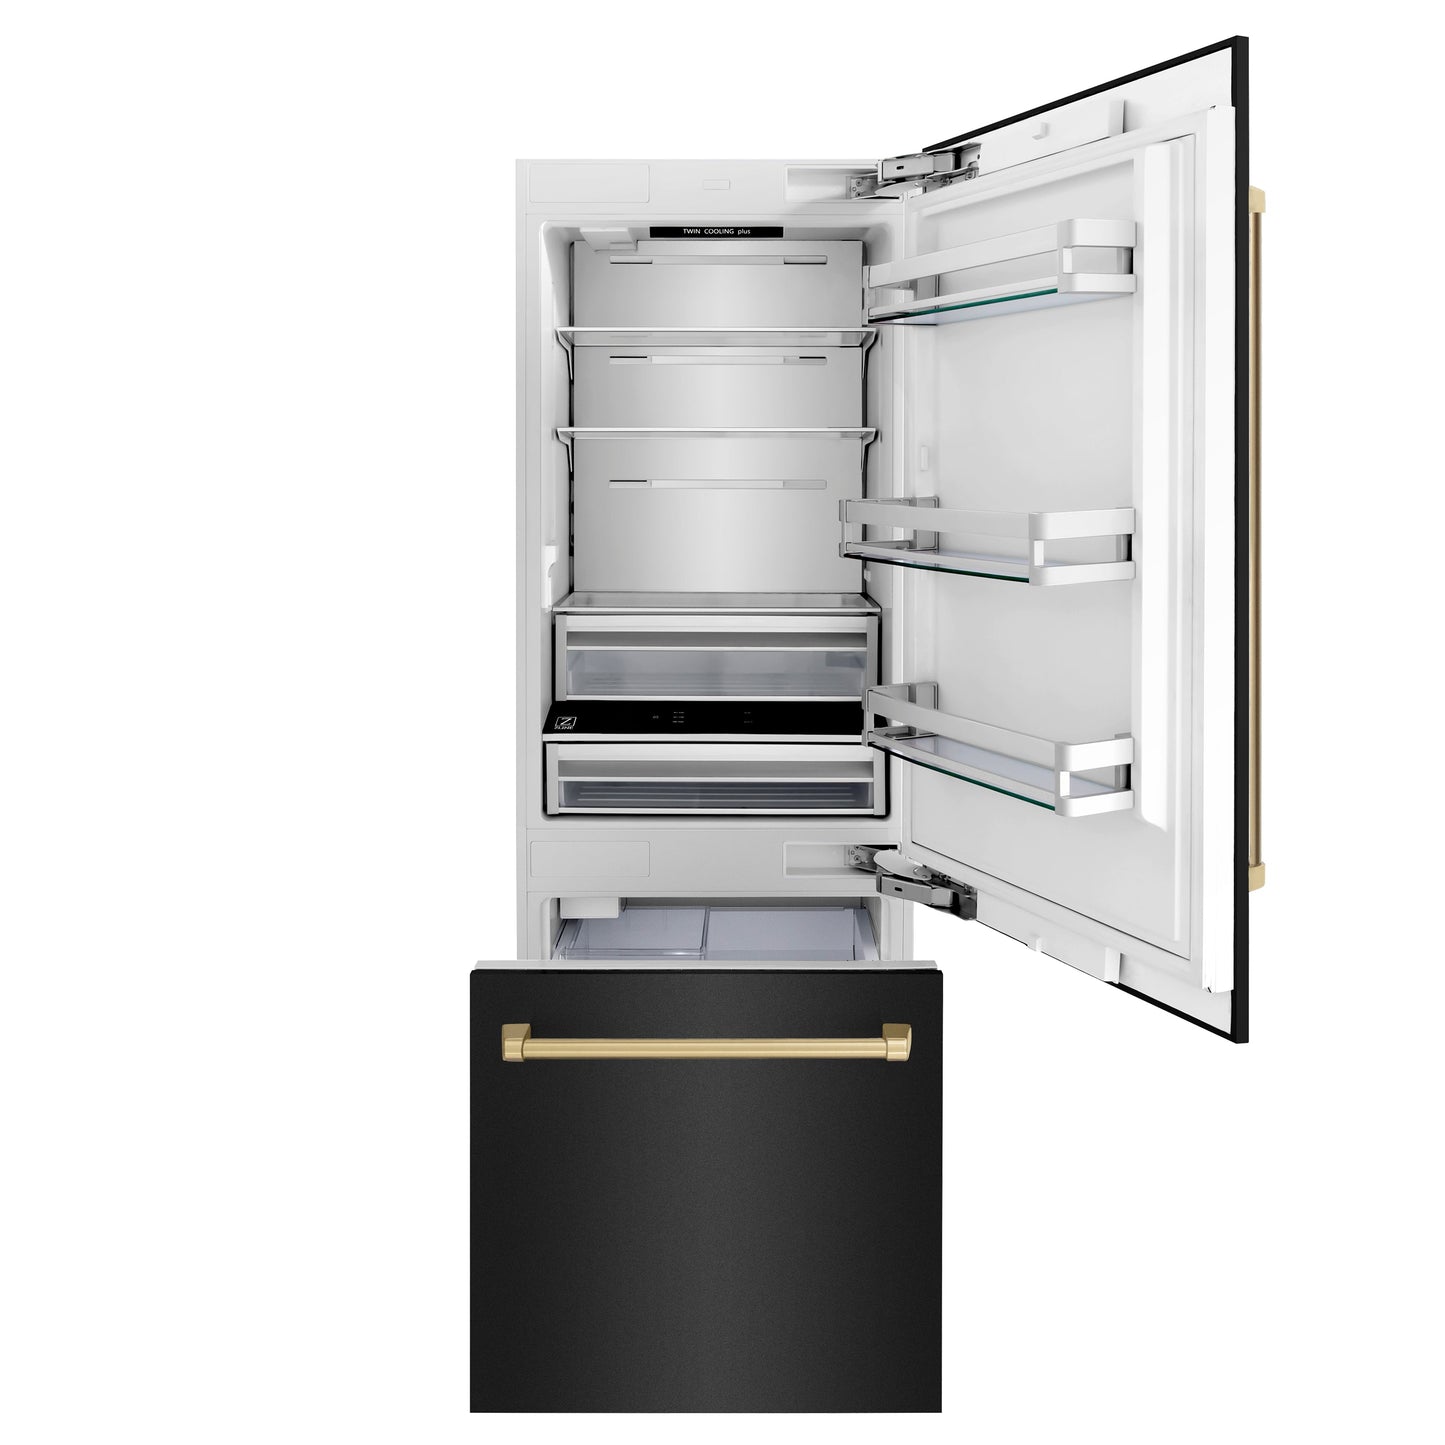 ZLINE 30" Built-in Refrigerator with Internal Water & Ice Dispenser in Black Stainless, Bronze Accents